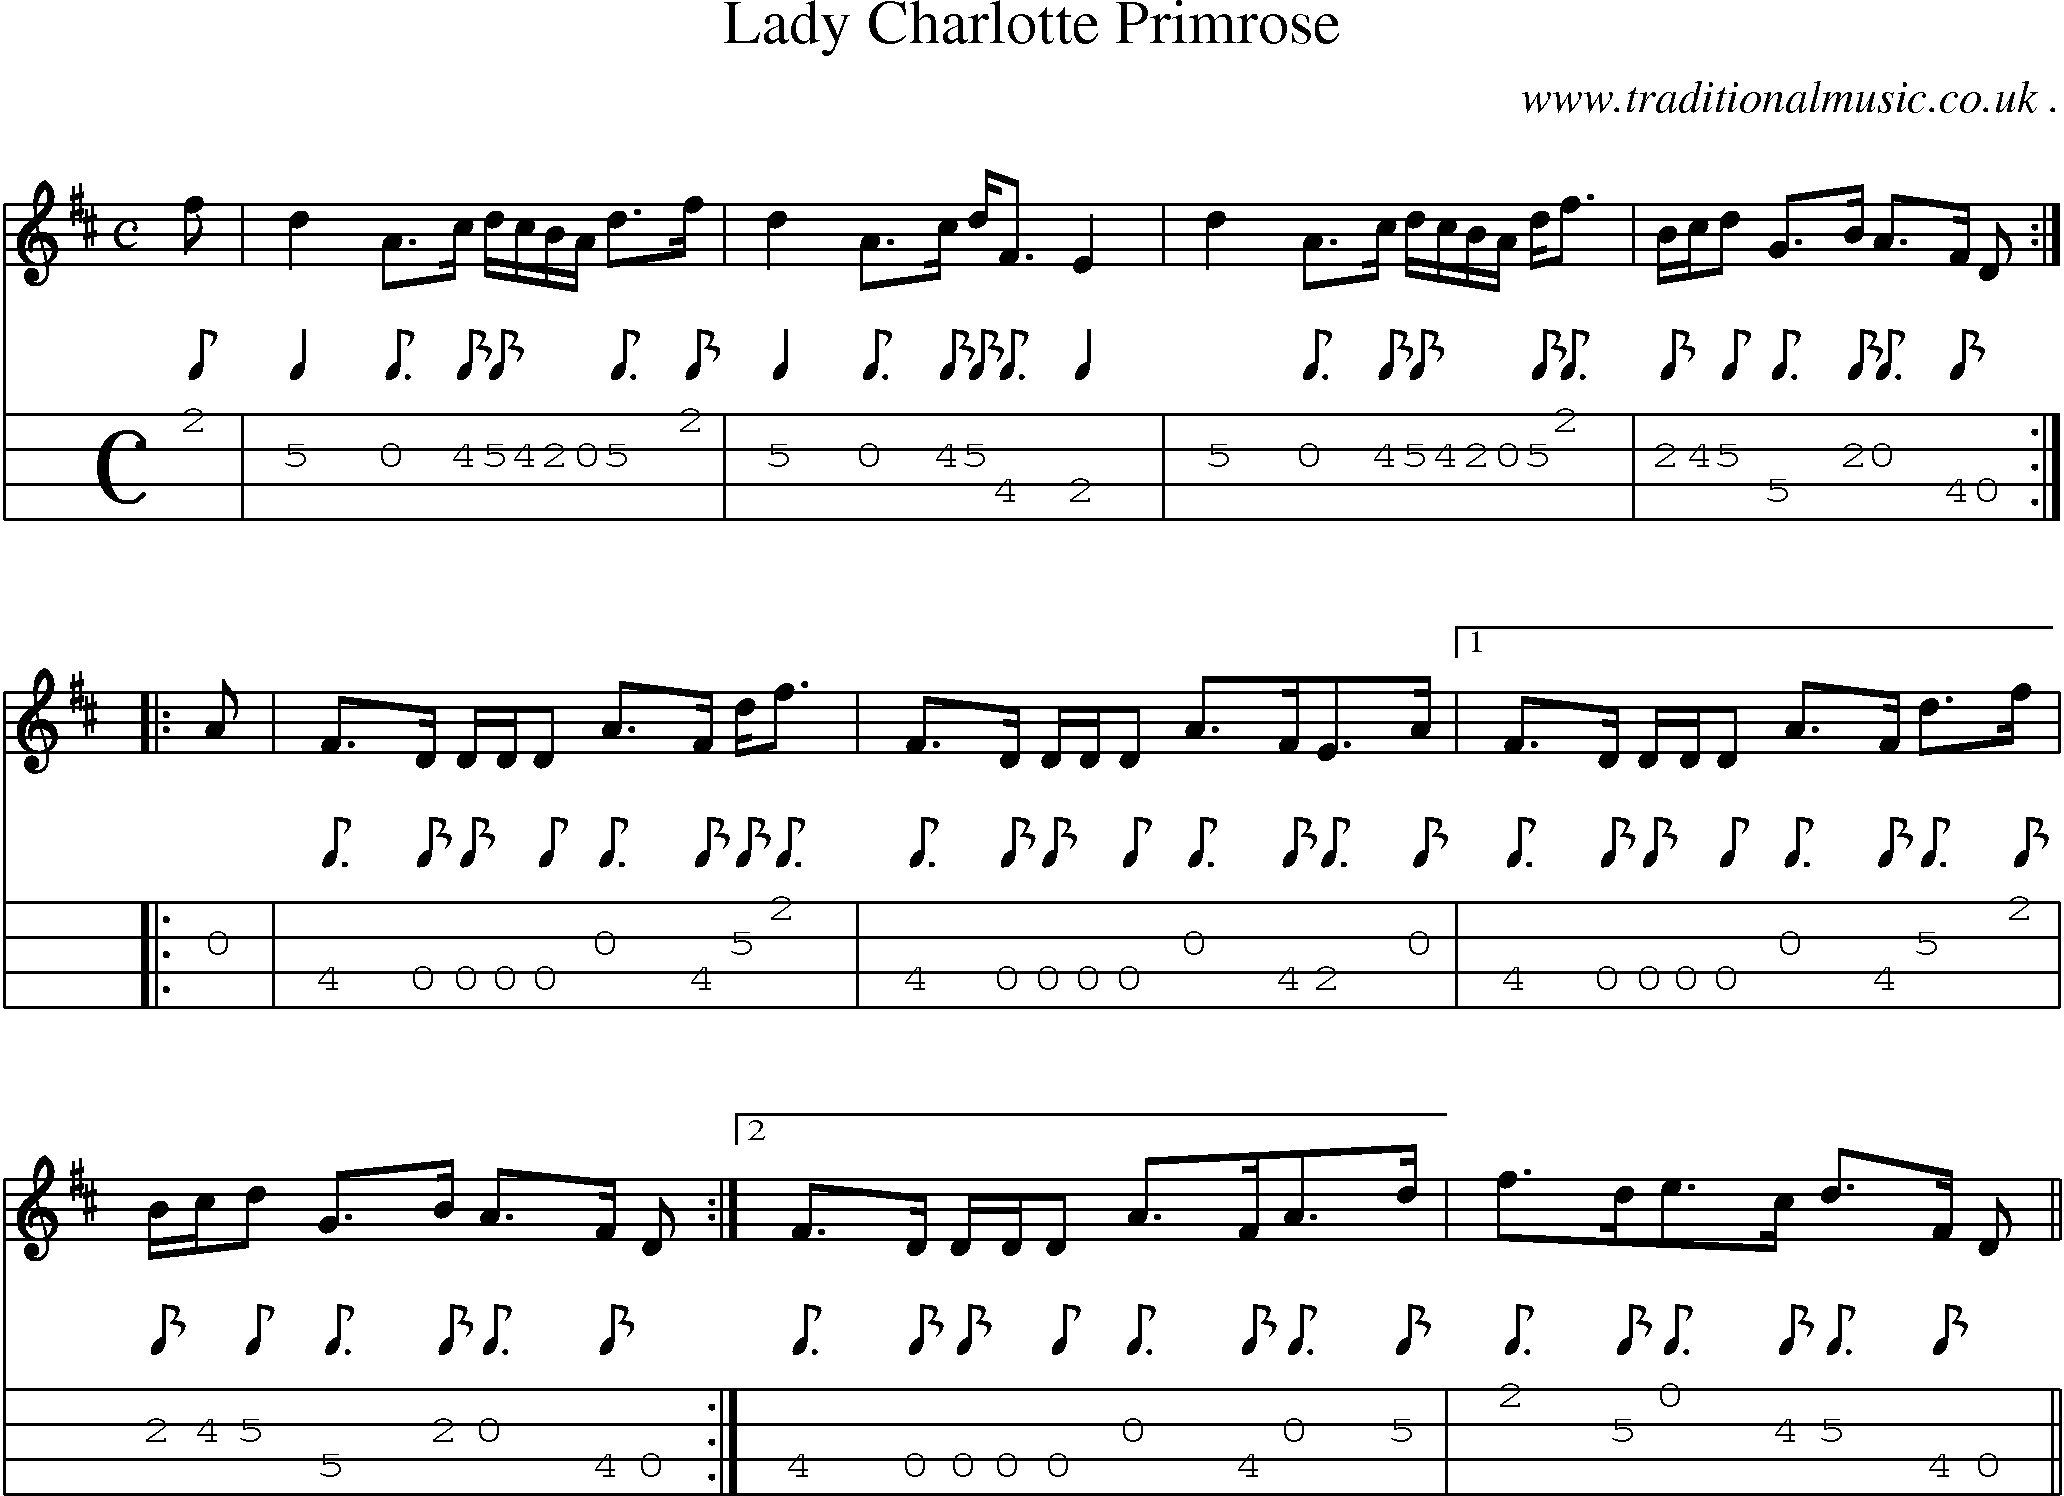 Sheet-music  score, Chords and Mandolin Tabs for Lady Charlotte Primrose